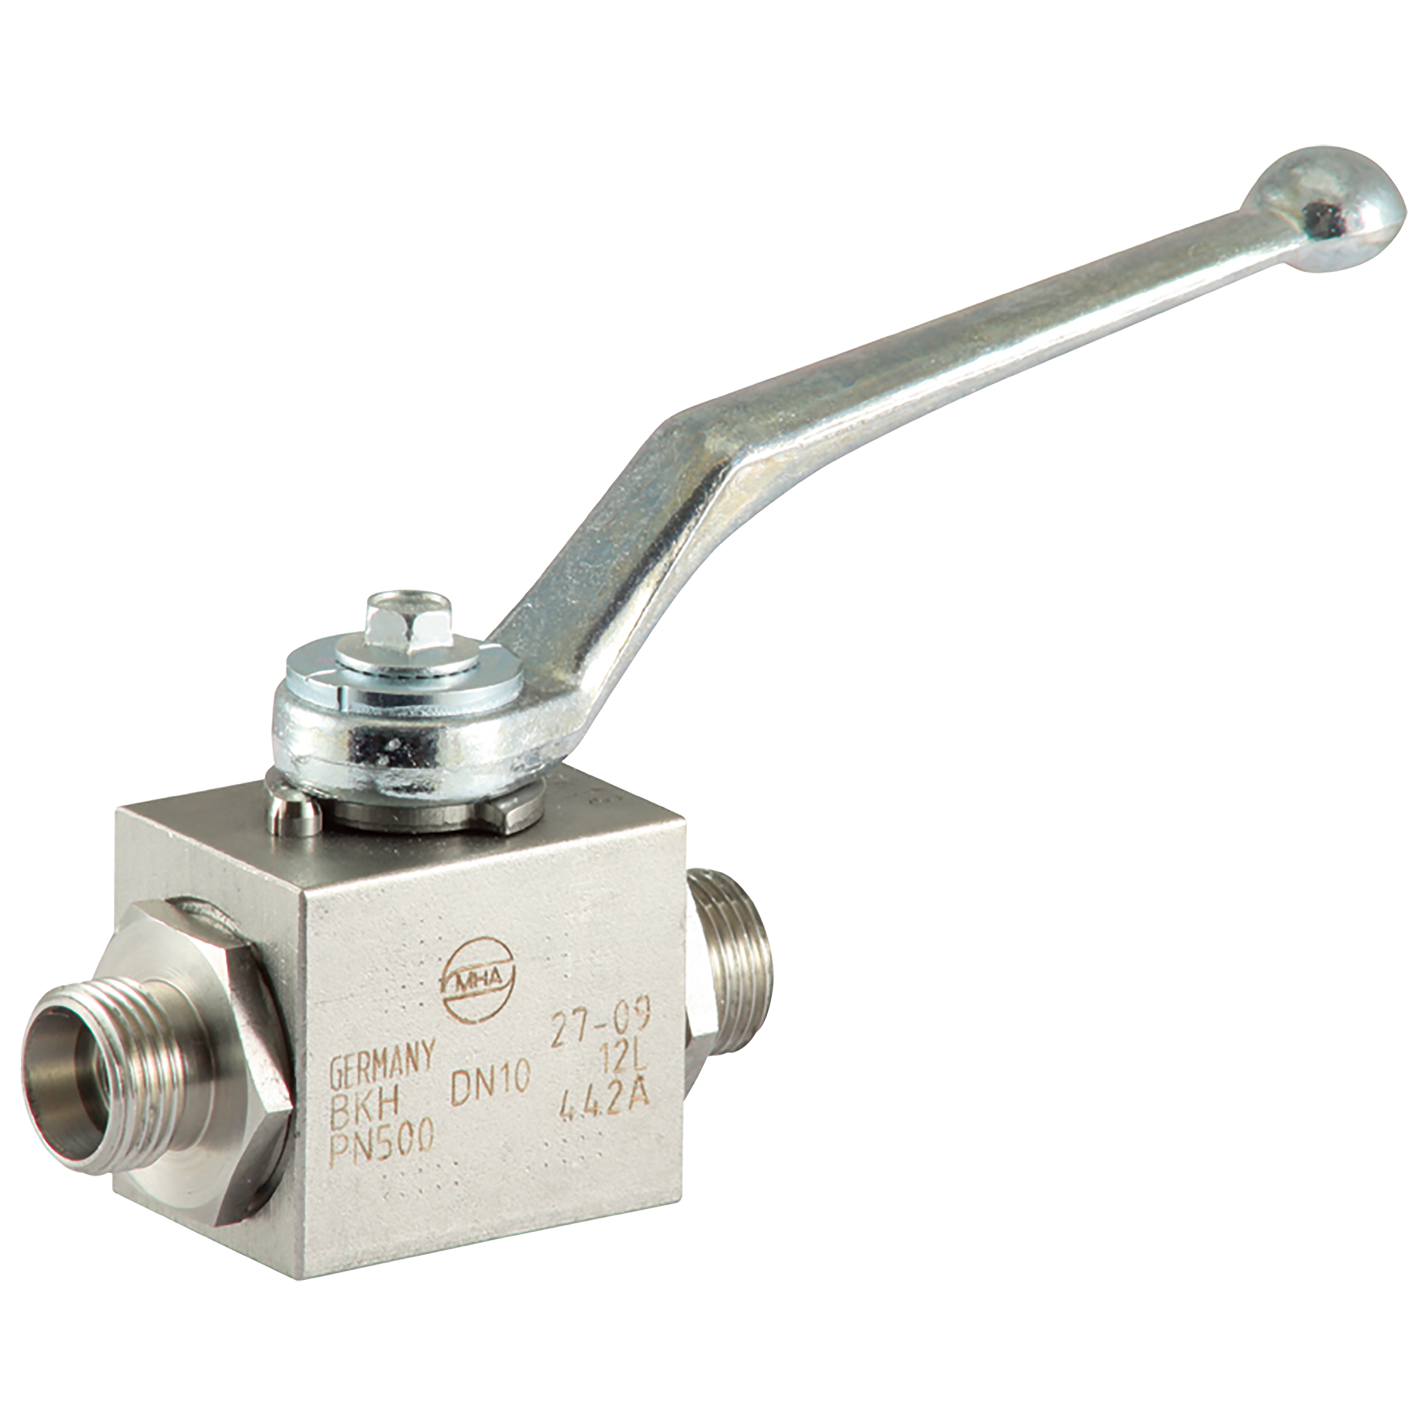 Industrial Valves For Hydraulics